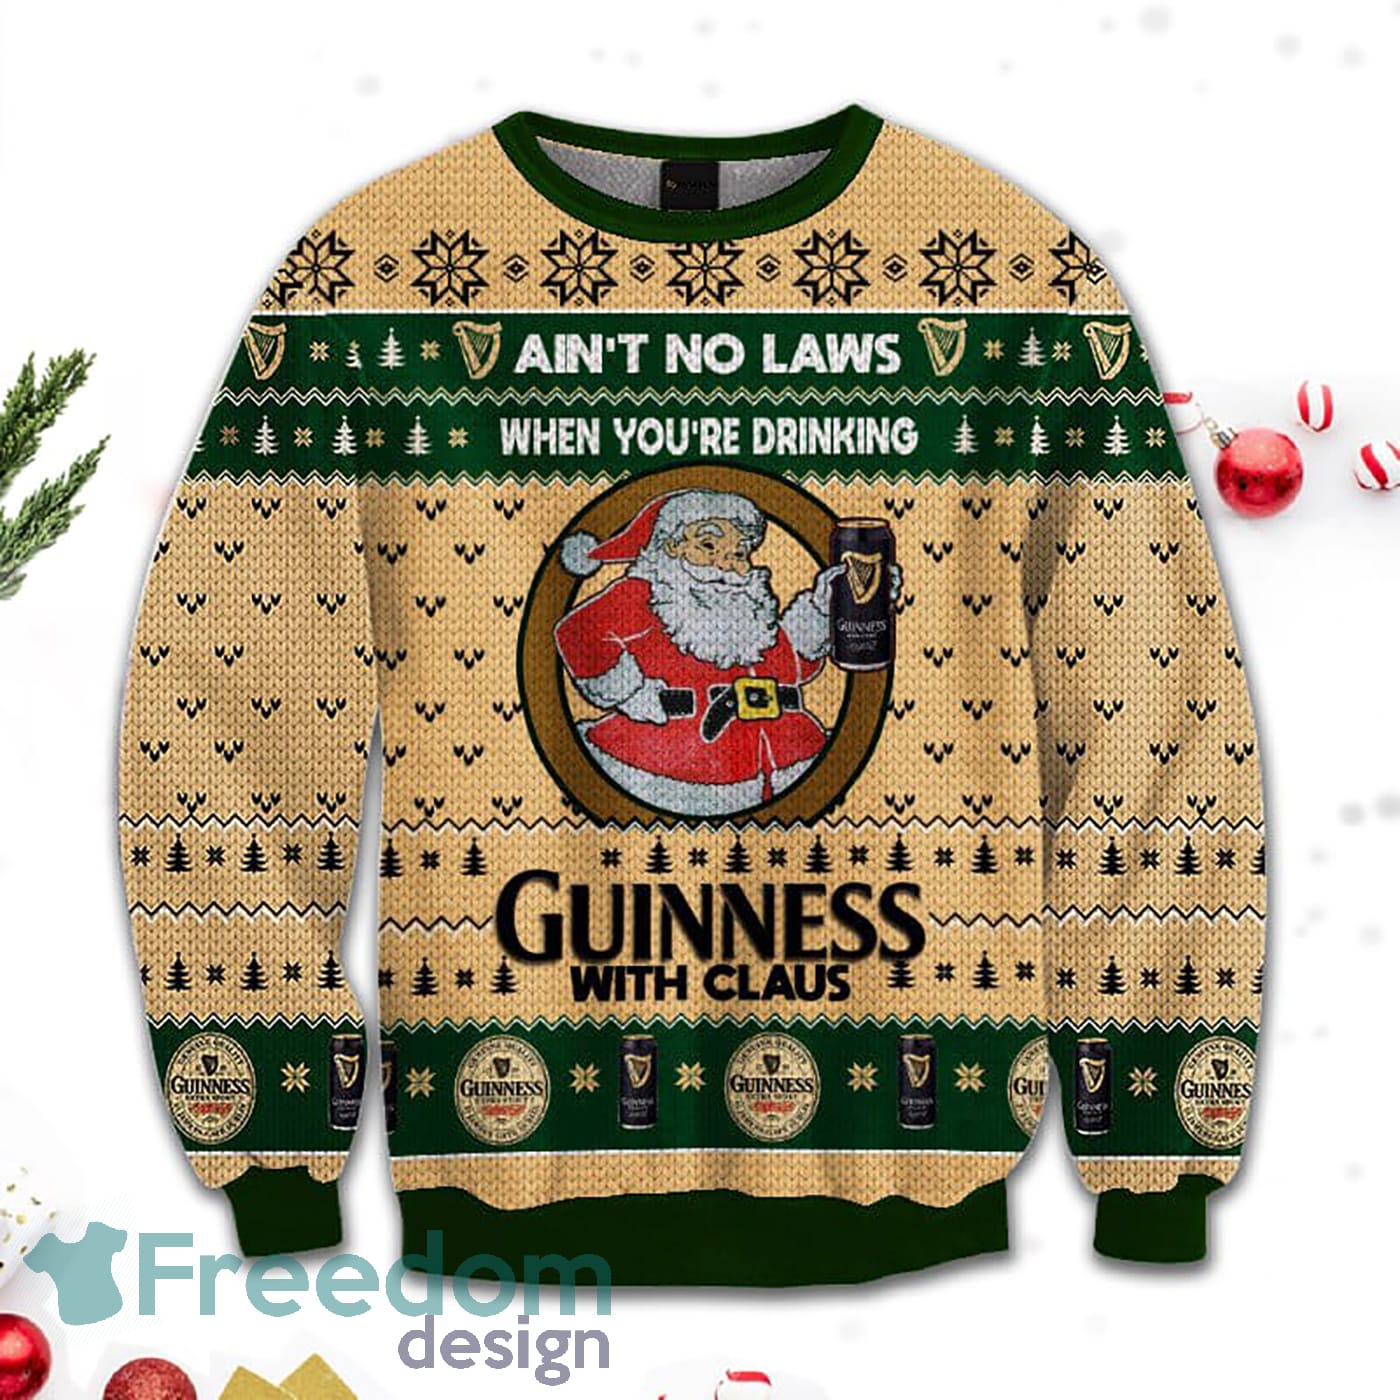 Merr Christmas Ain't No Laws When You Drink Guinness With Claus Sweatshirt